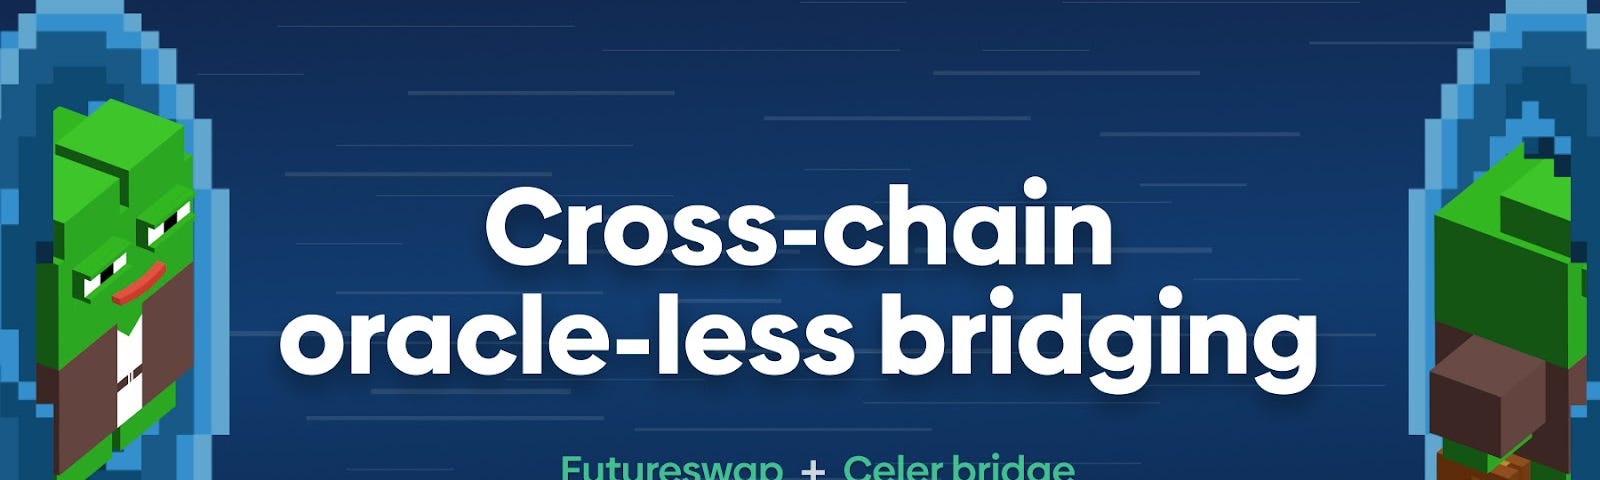 Image of a pixelated character going through a portal with copy superimposed in between saying “cross-chain oracle-less bridging | Futureswap + Celer bridge”